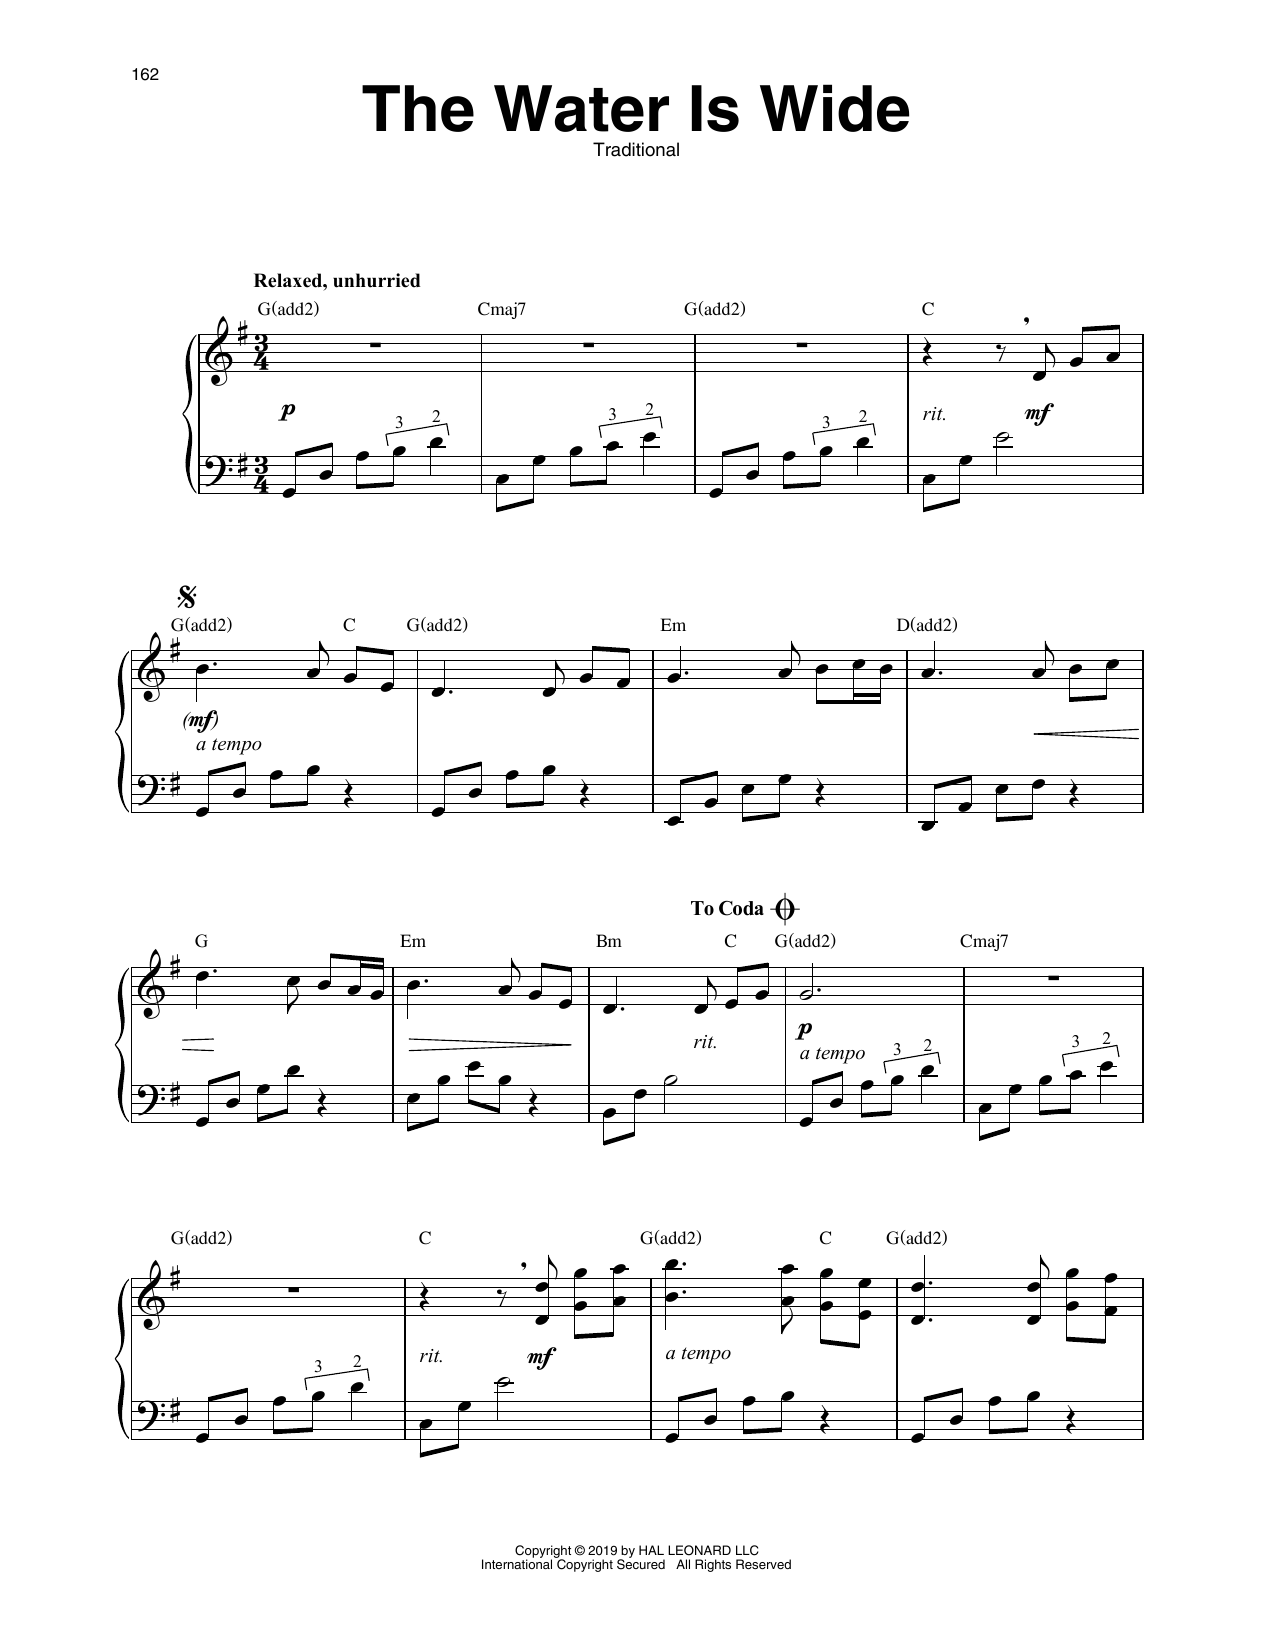 Download Traditional Water Is Wide Sheet Music